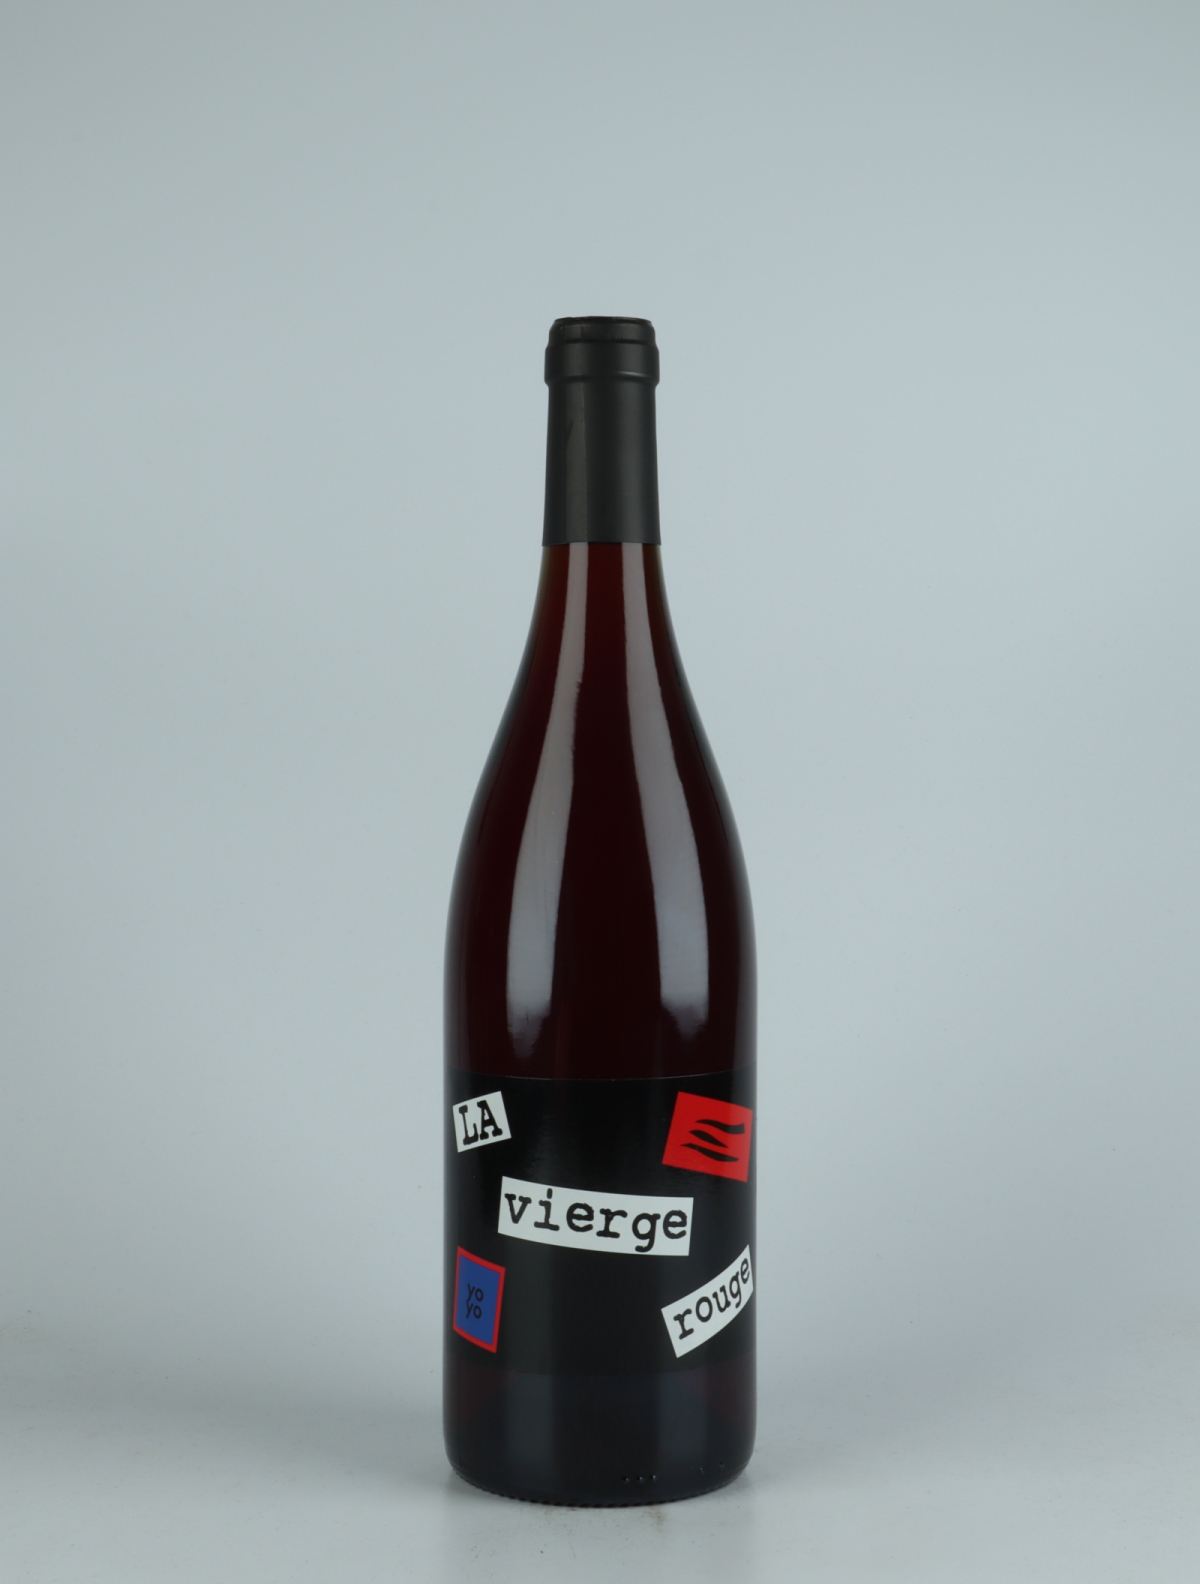 A bottle 2021 La Vierge Rouge Red wine from Domaine Yoyo, Rousillon in France